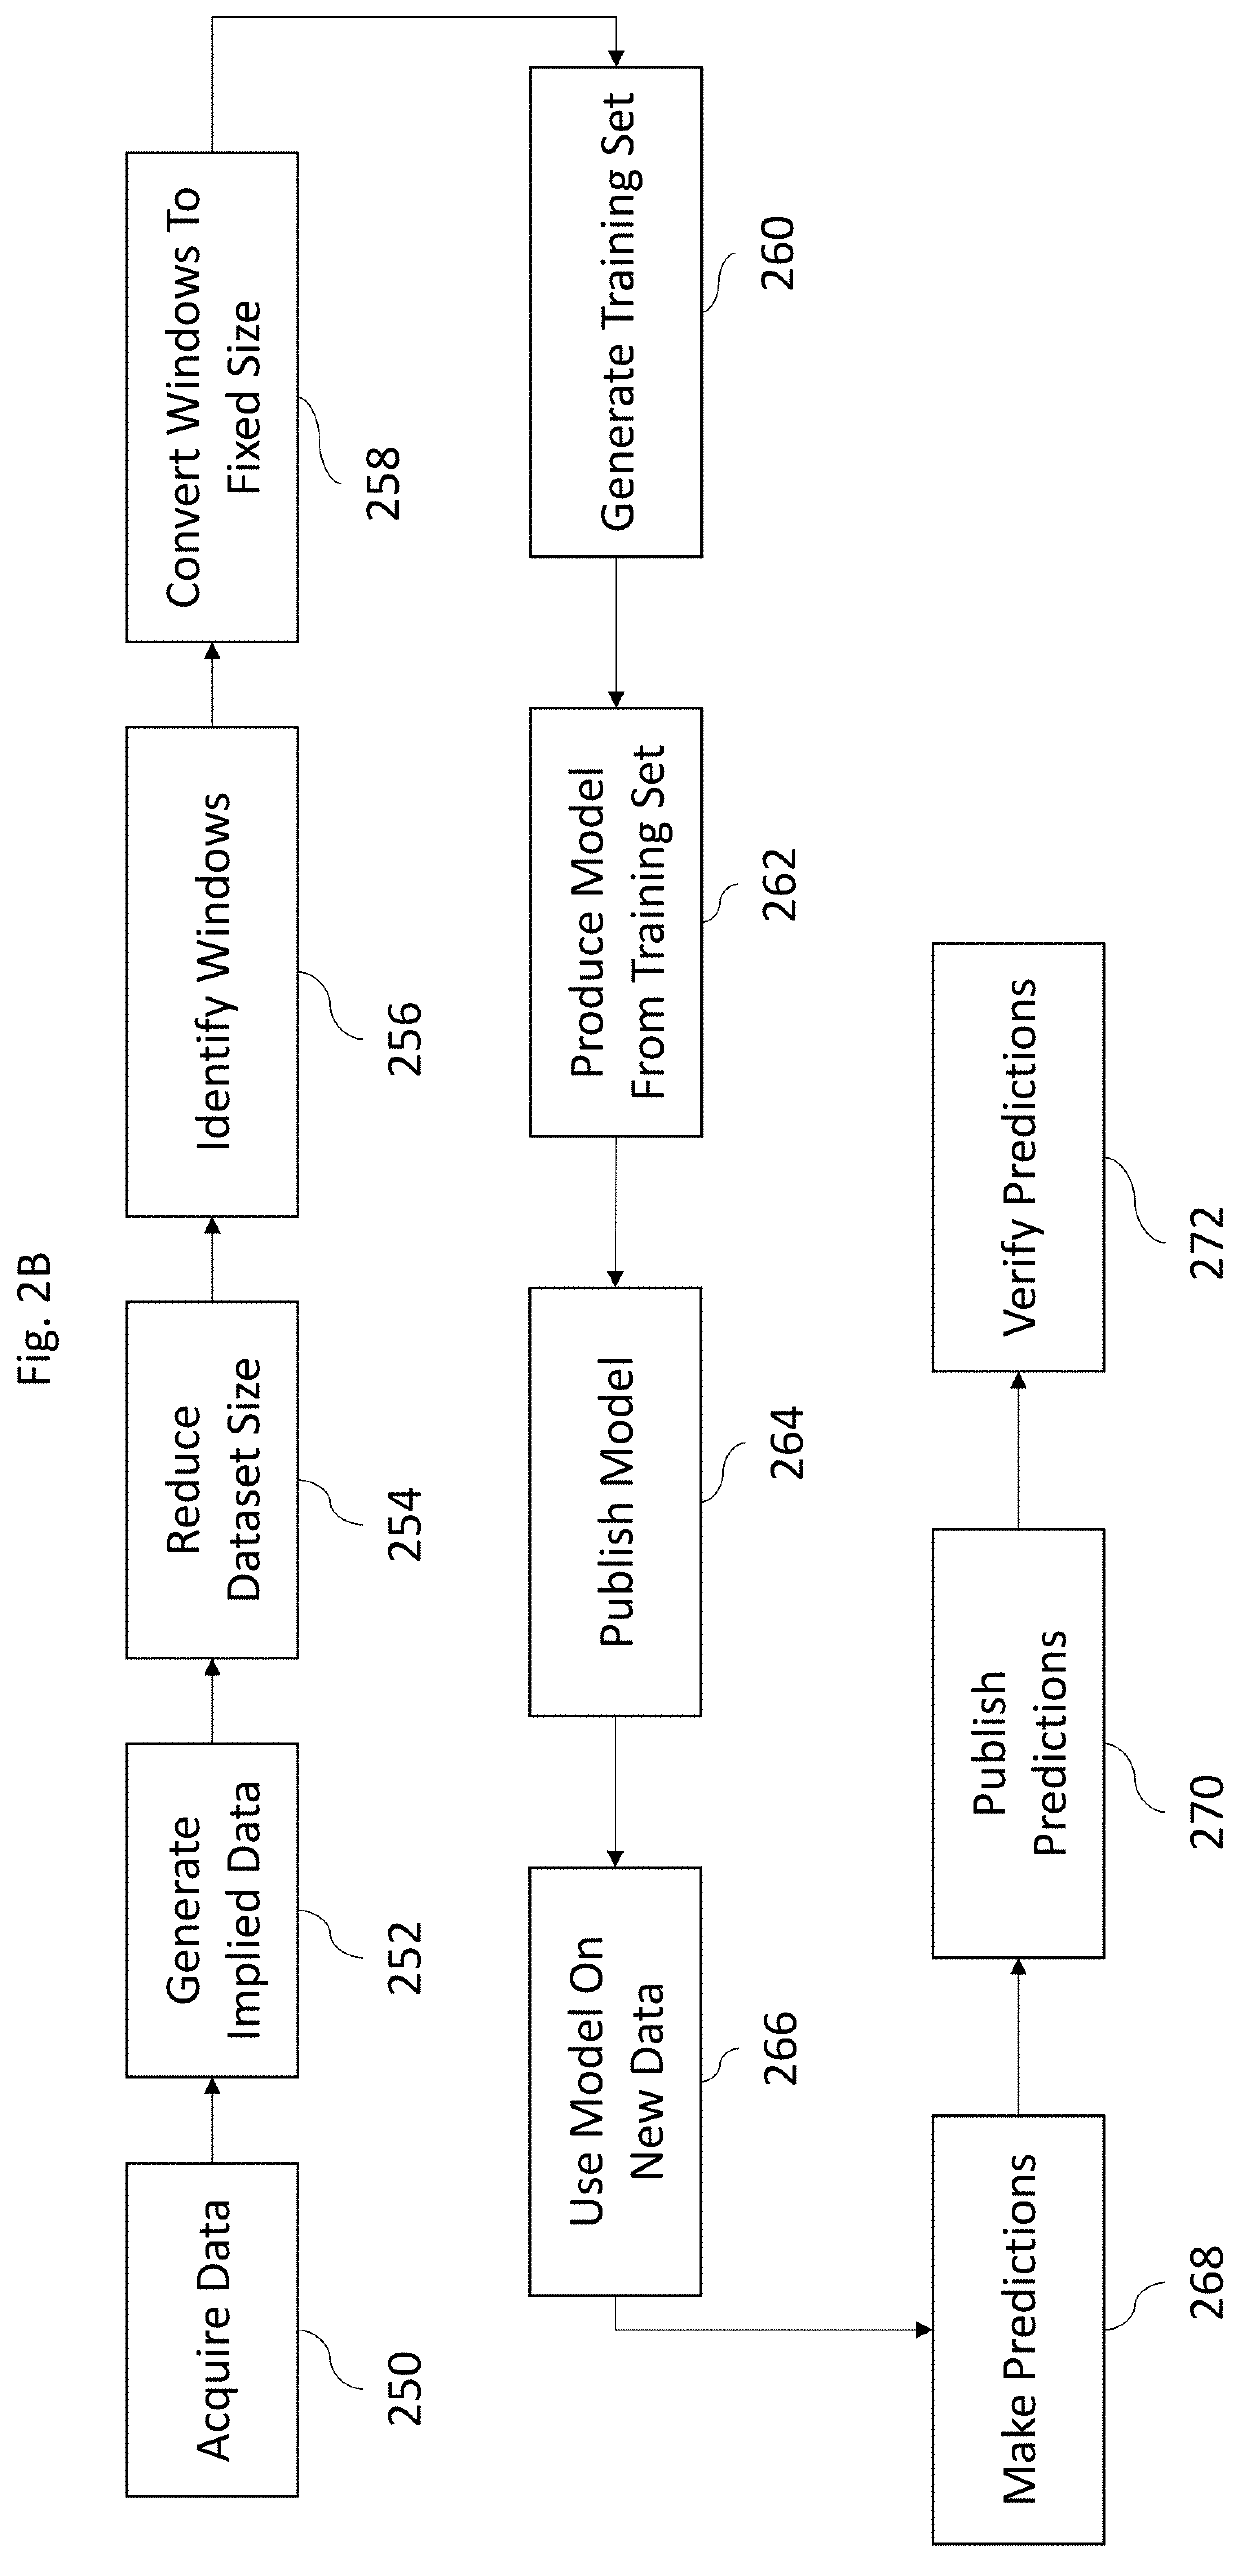 Systems and methods of windowing time series data for pattern detection